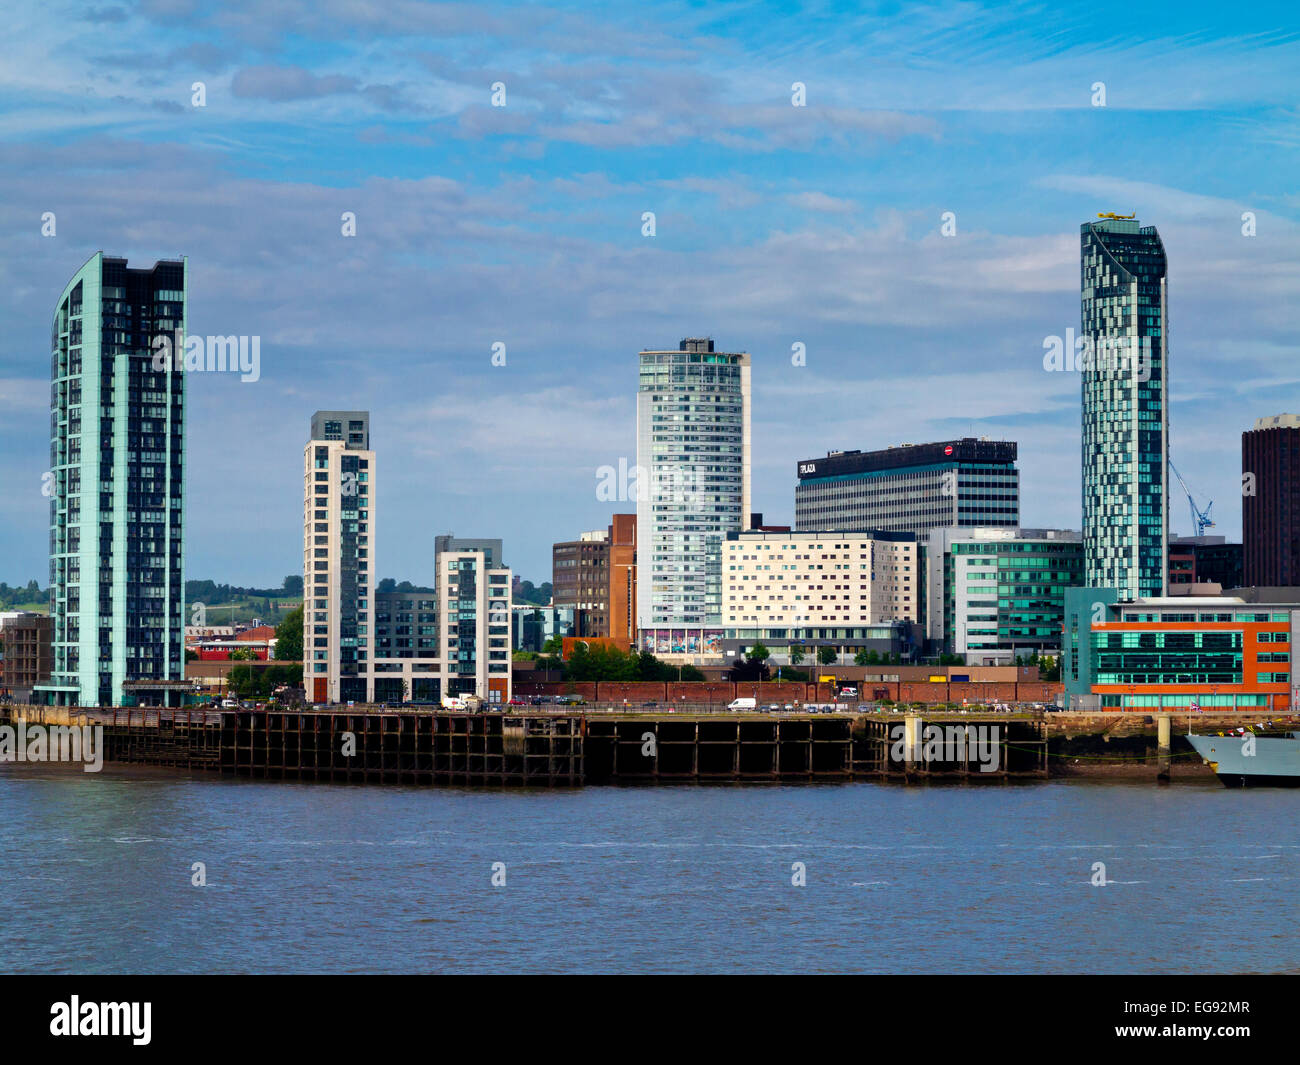 View across the River Mersey towards the City of Liverpool Waterfront with new skyscrapers on the skyline England UK Stock Photo